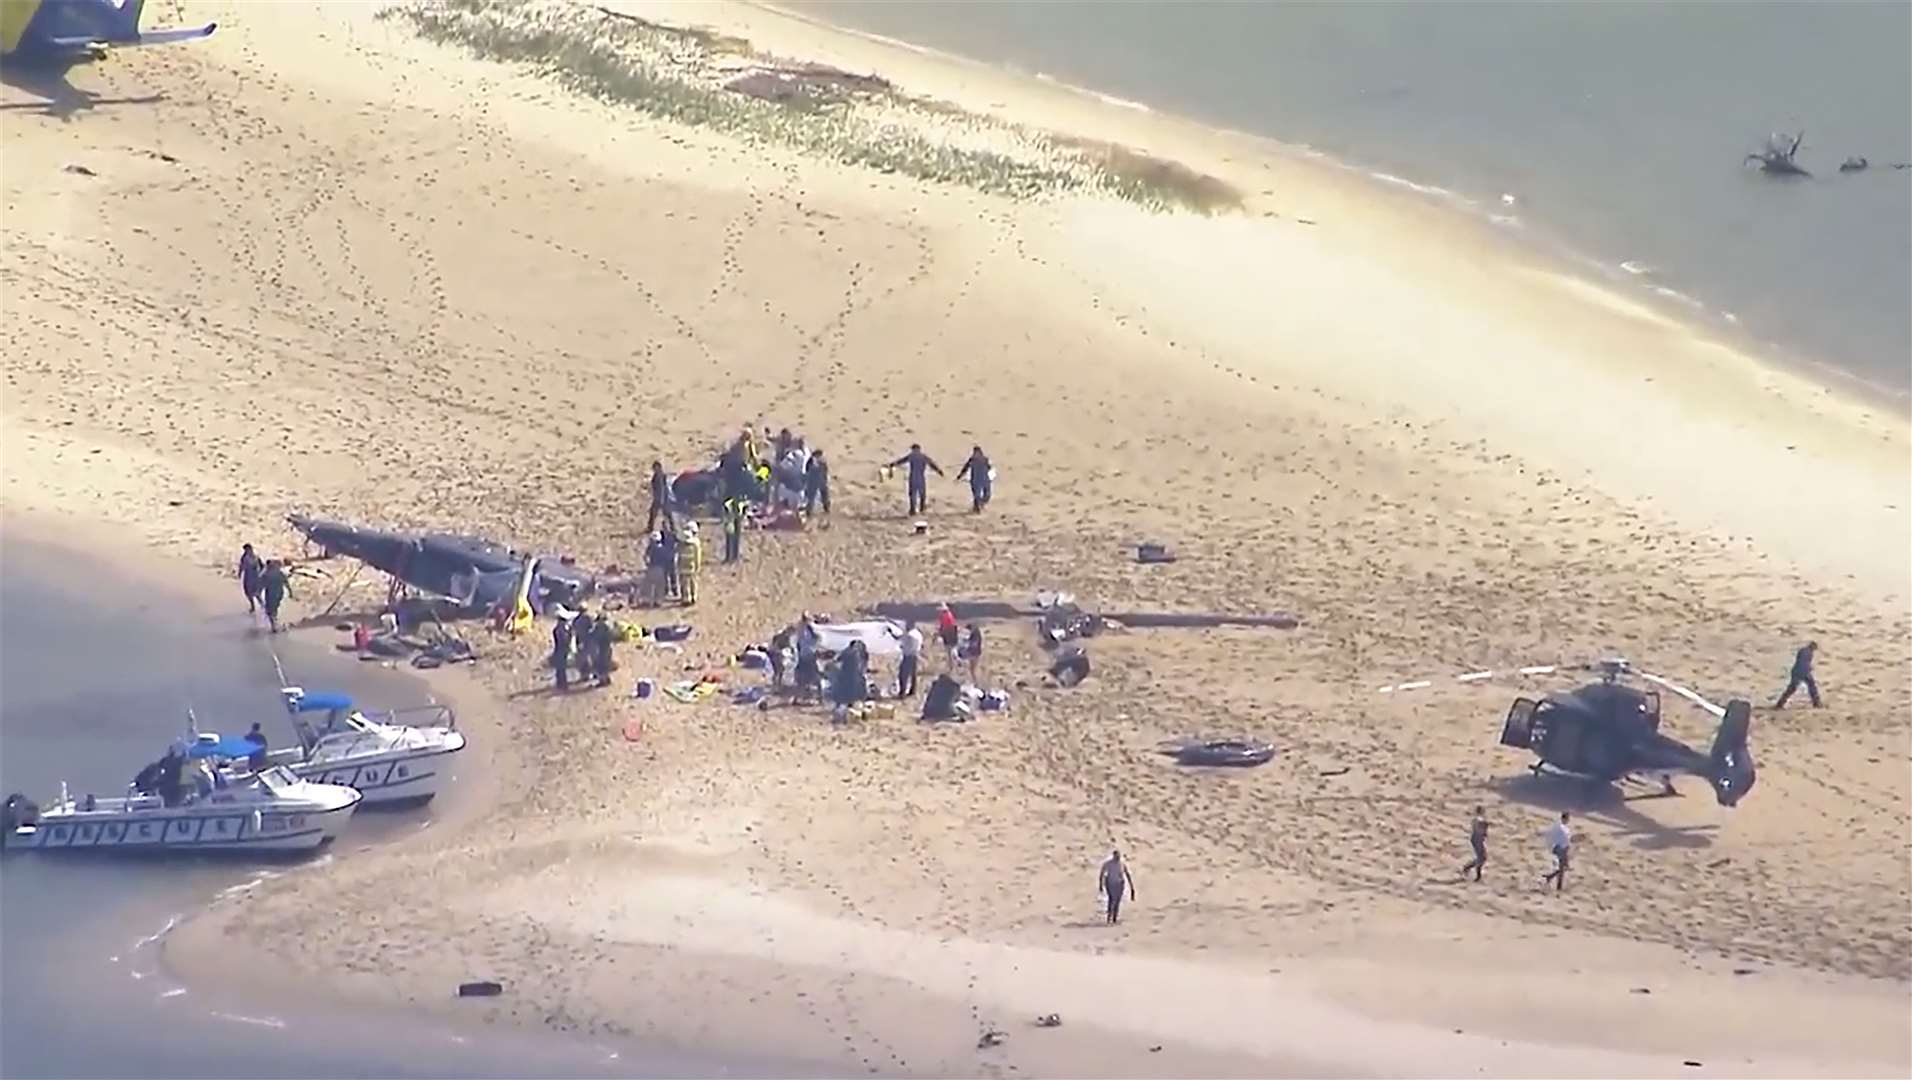 Two helicopters collided in the Australian tourist hotspot on Monday afternoon (CH9/AP)